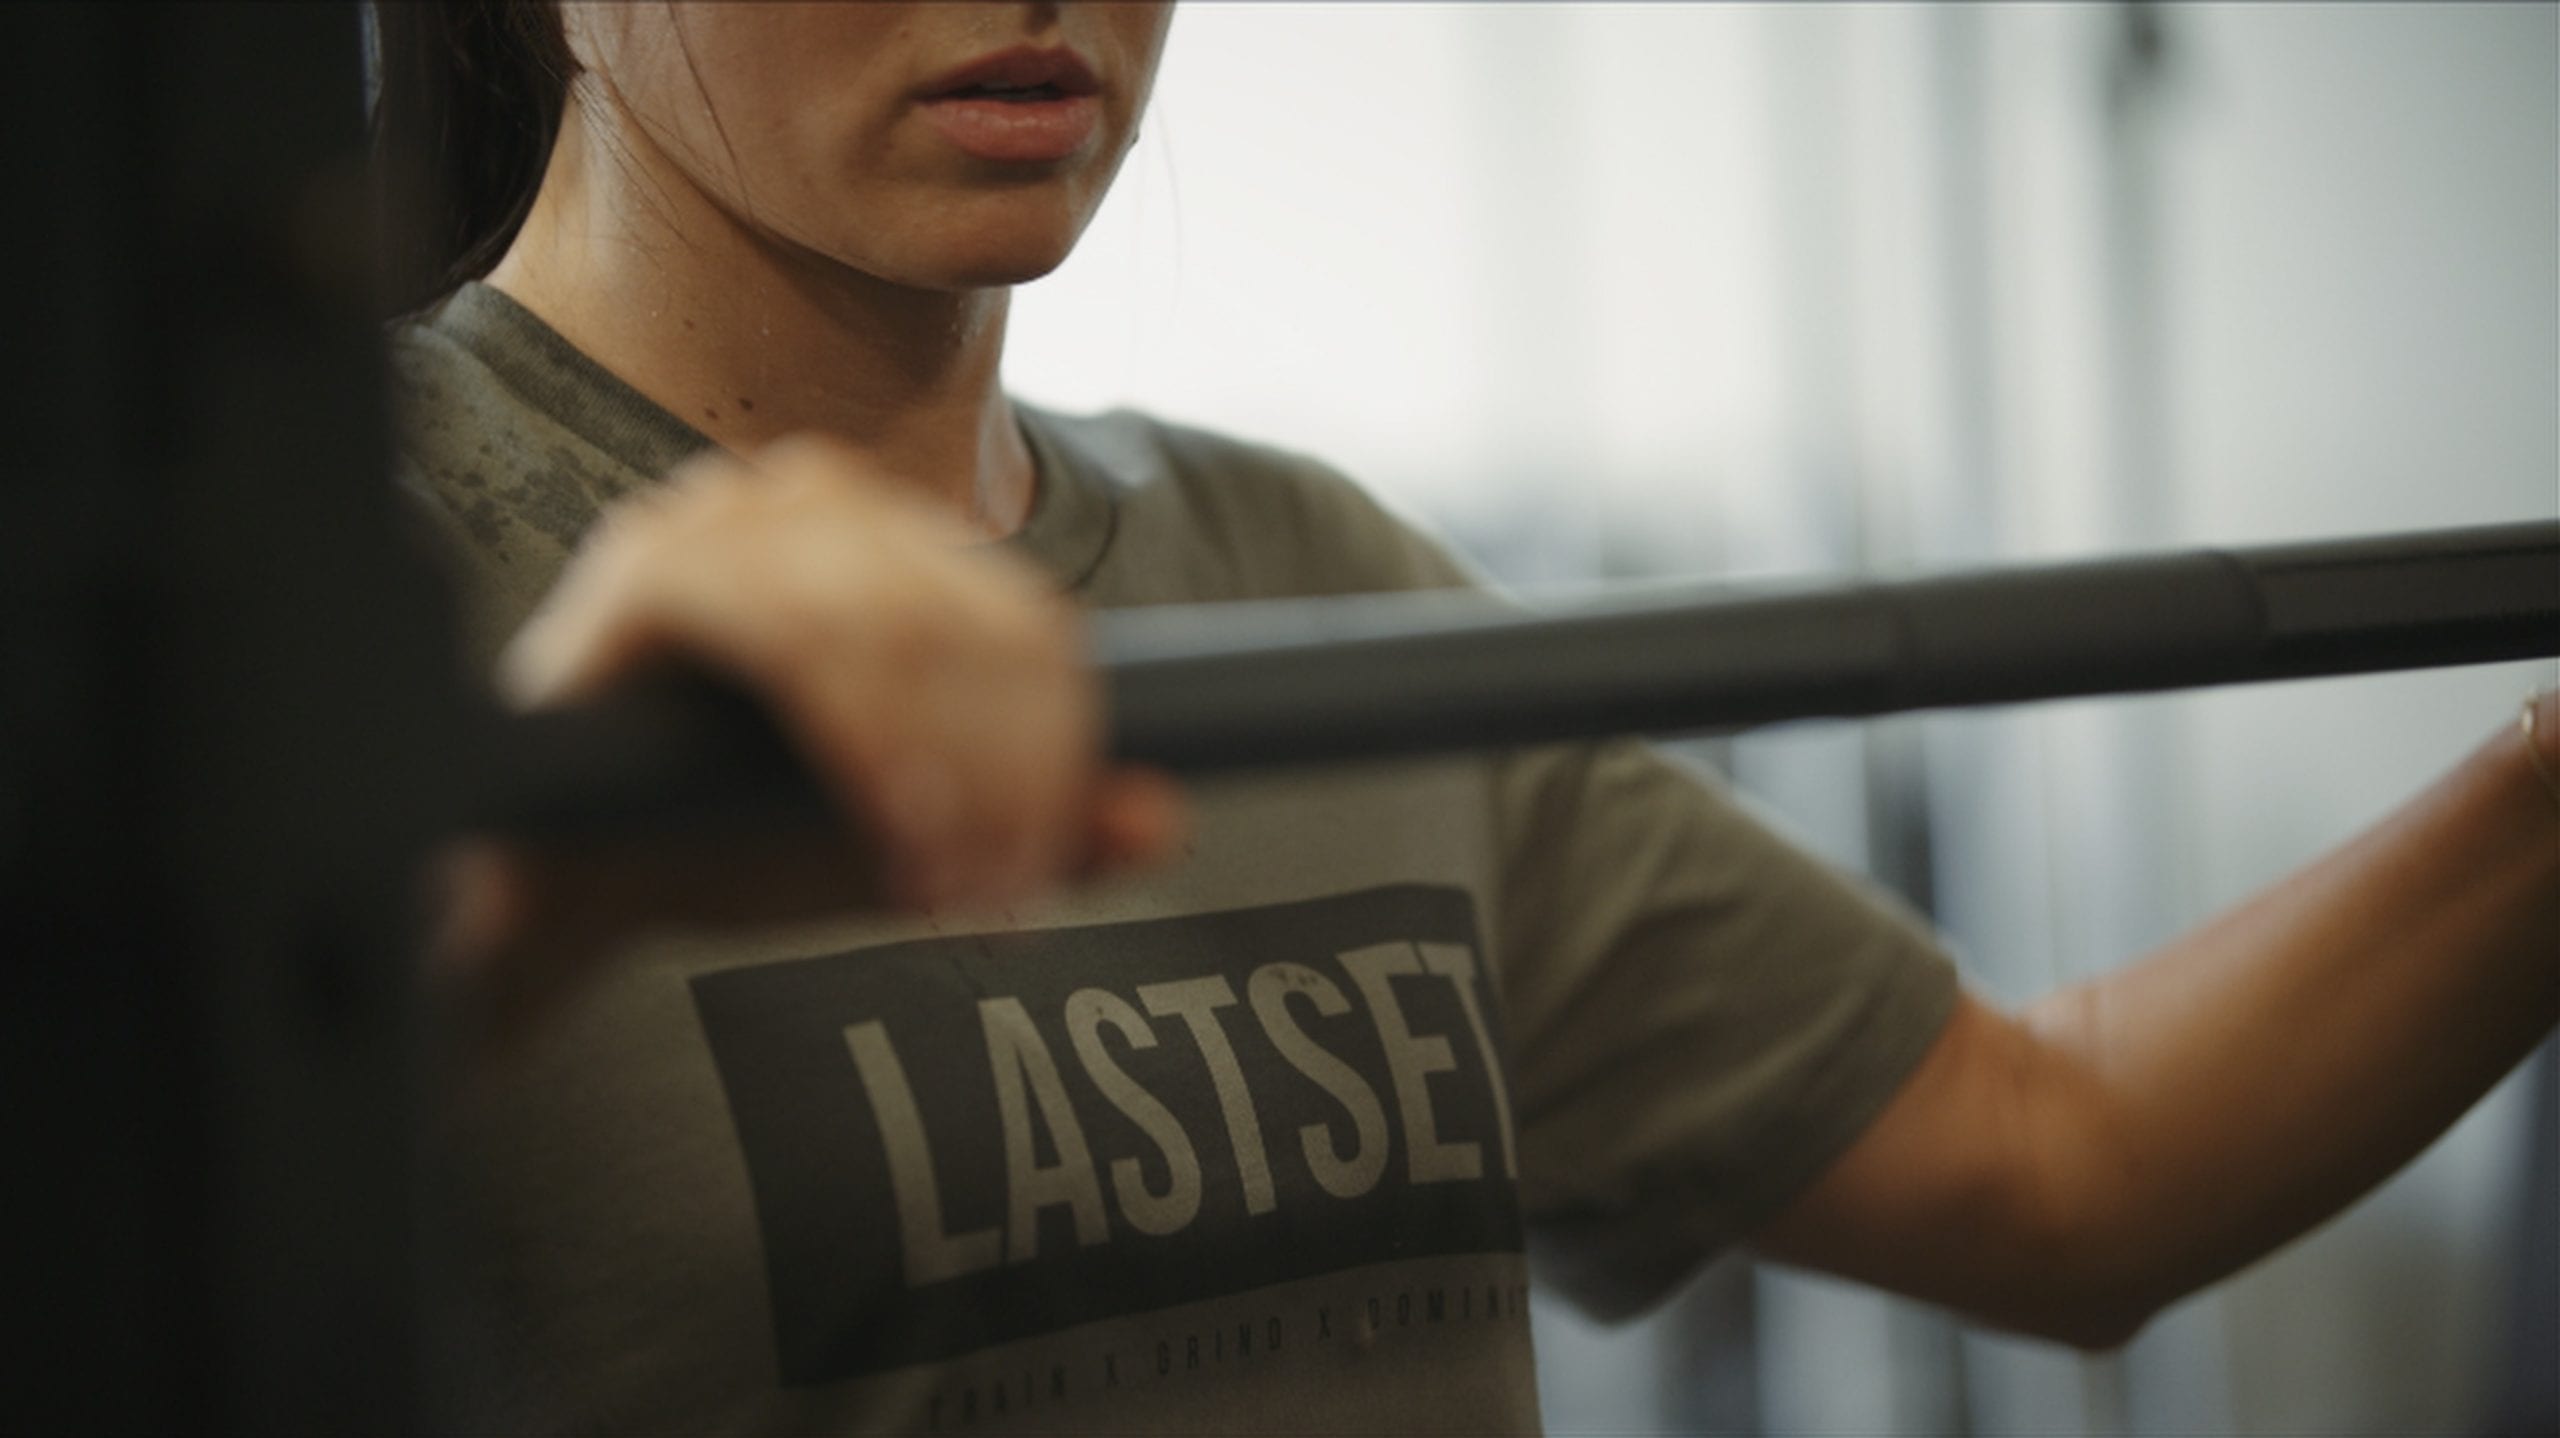 LastSet Clothing Line Brand Video Closeup of woman in a gray t shirt holding weight bar